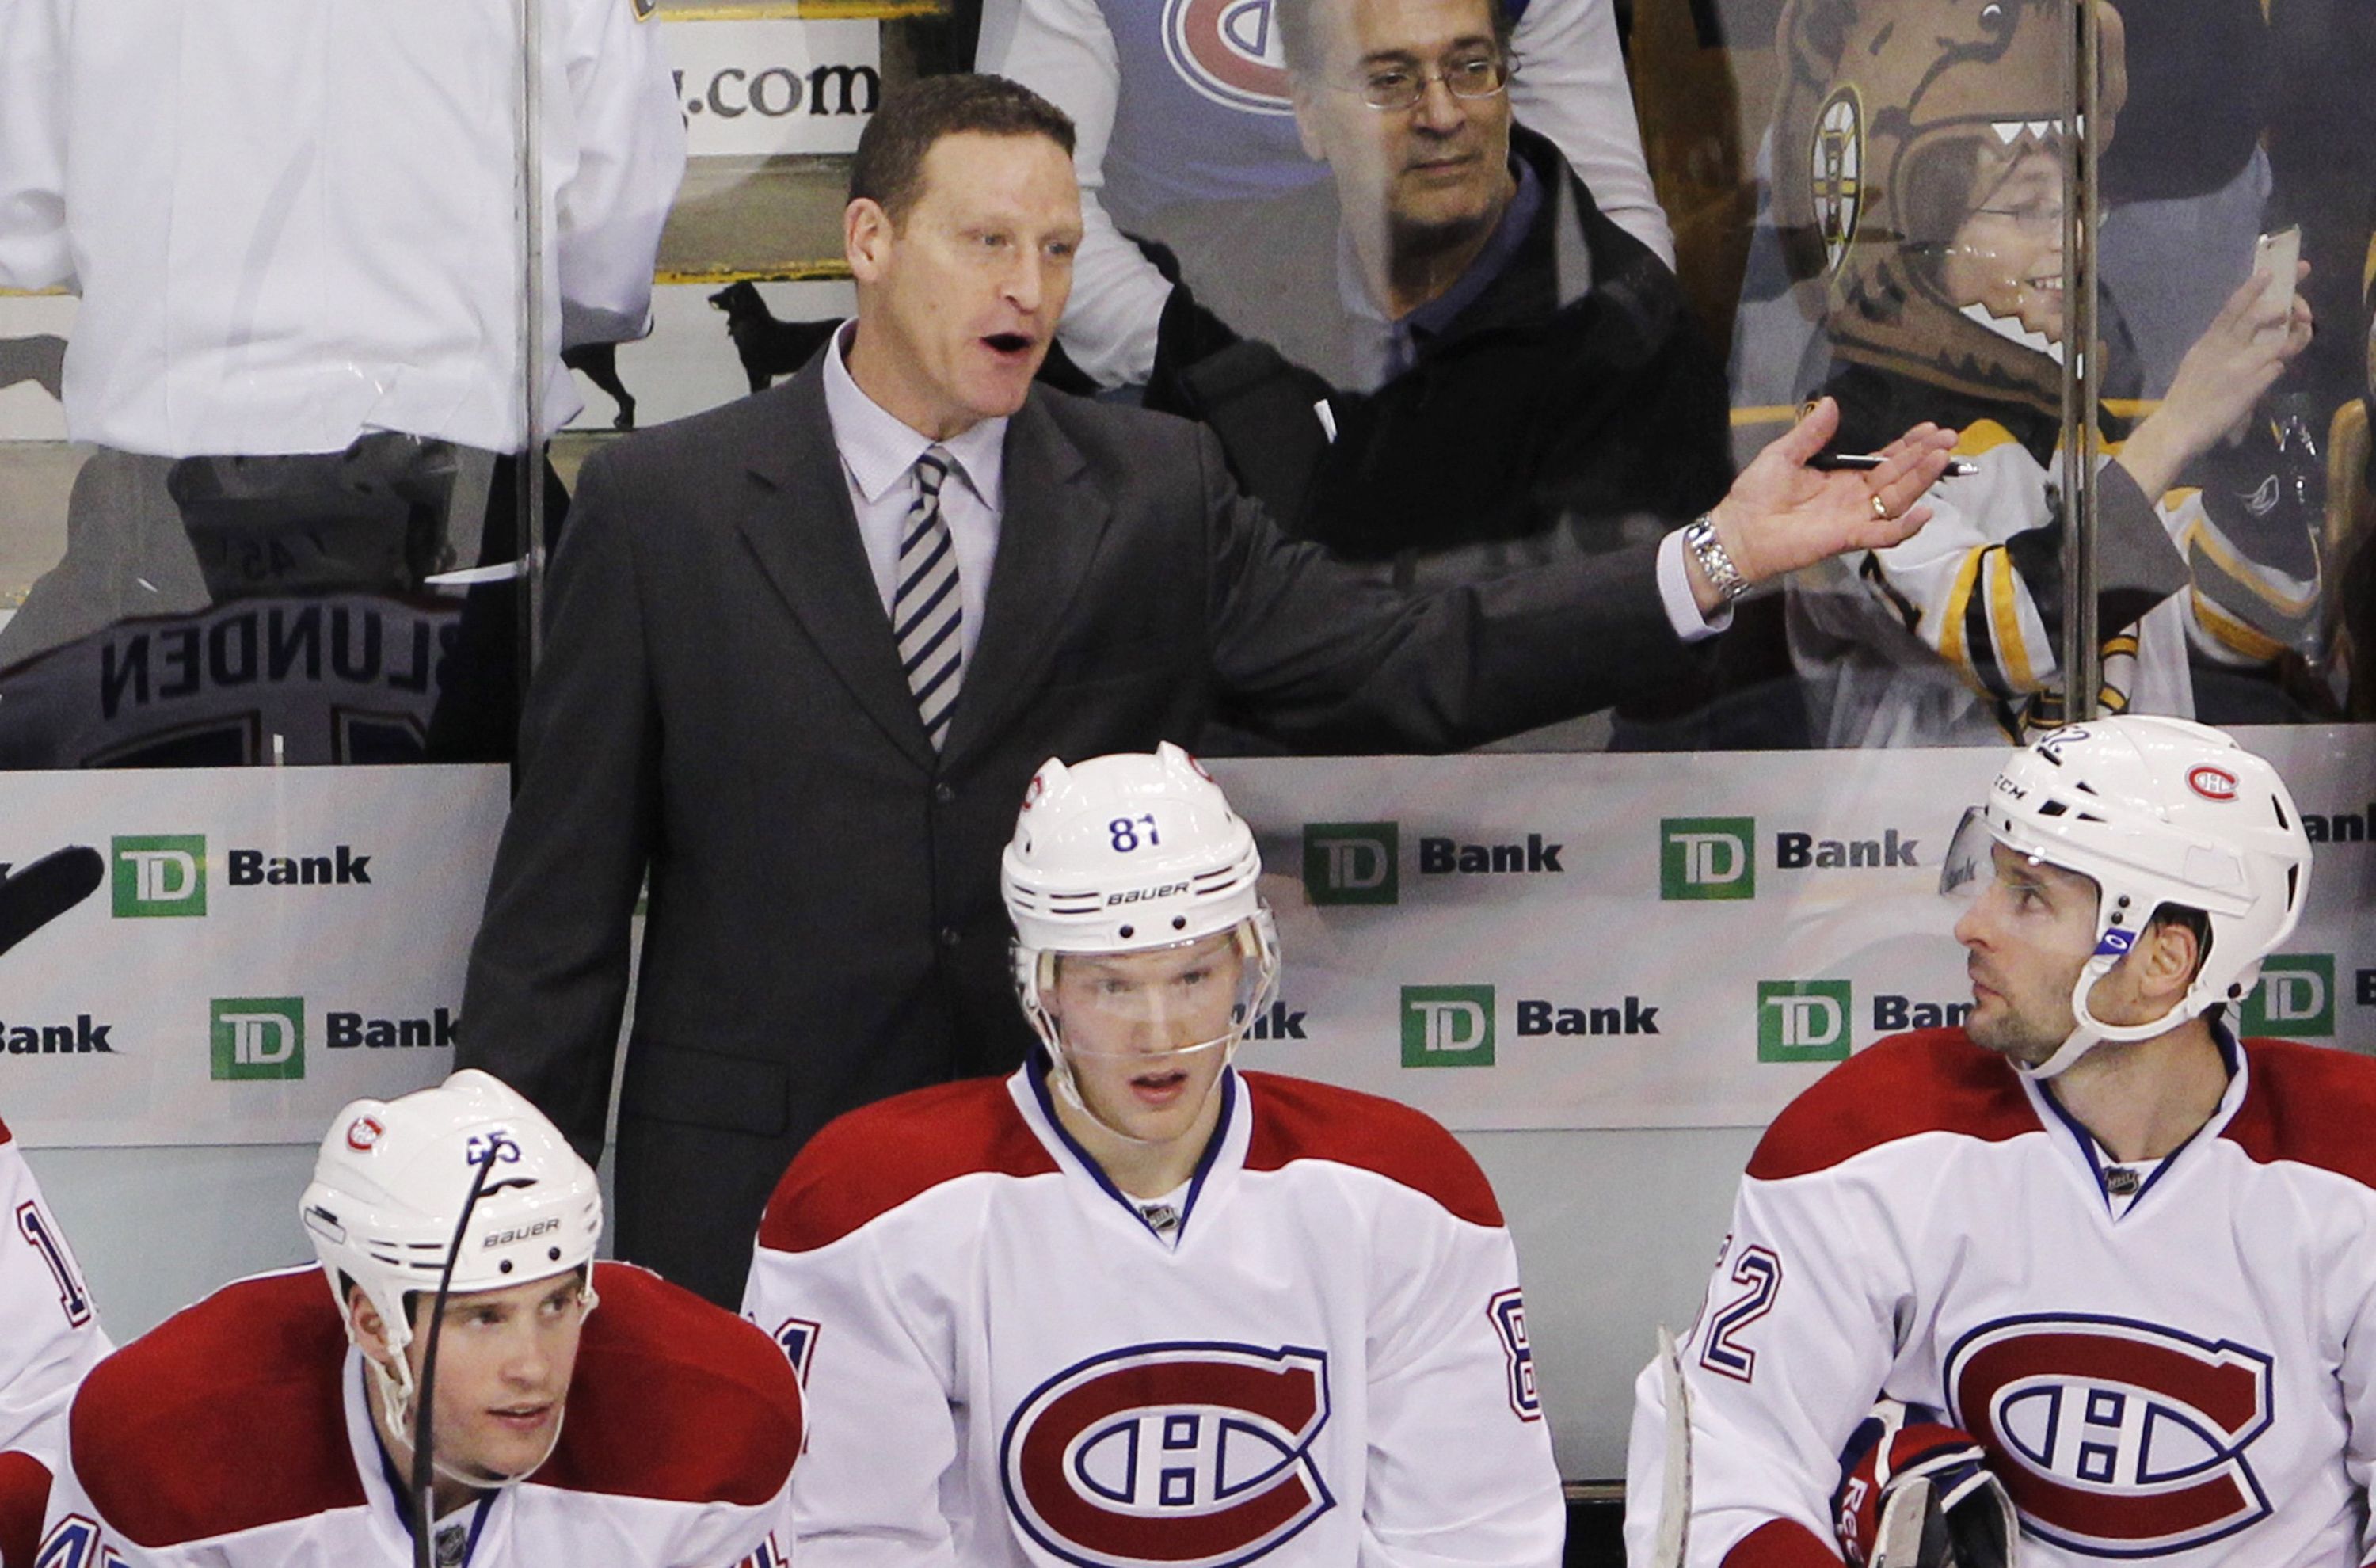 Canadiens: What If Mats Sundin Agreed To Play For Habs? - Page 2